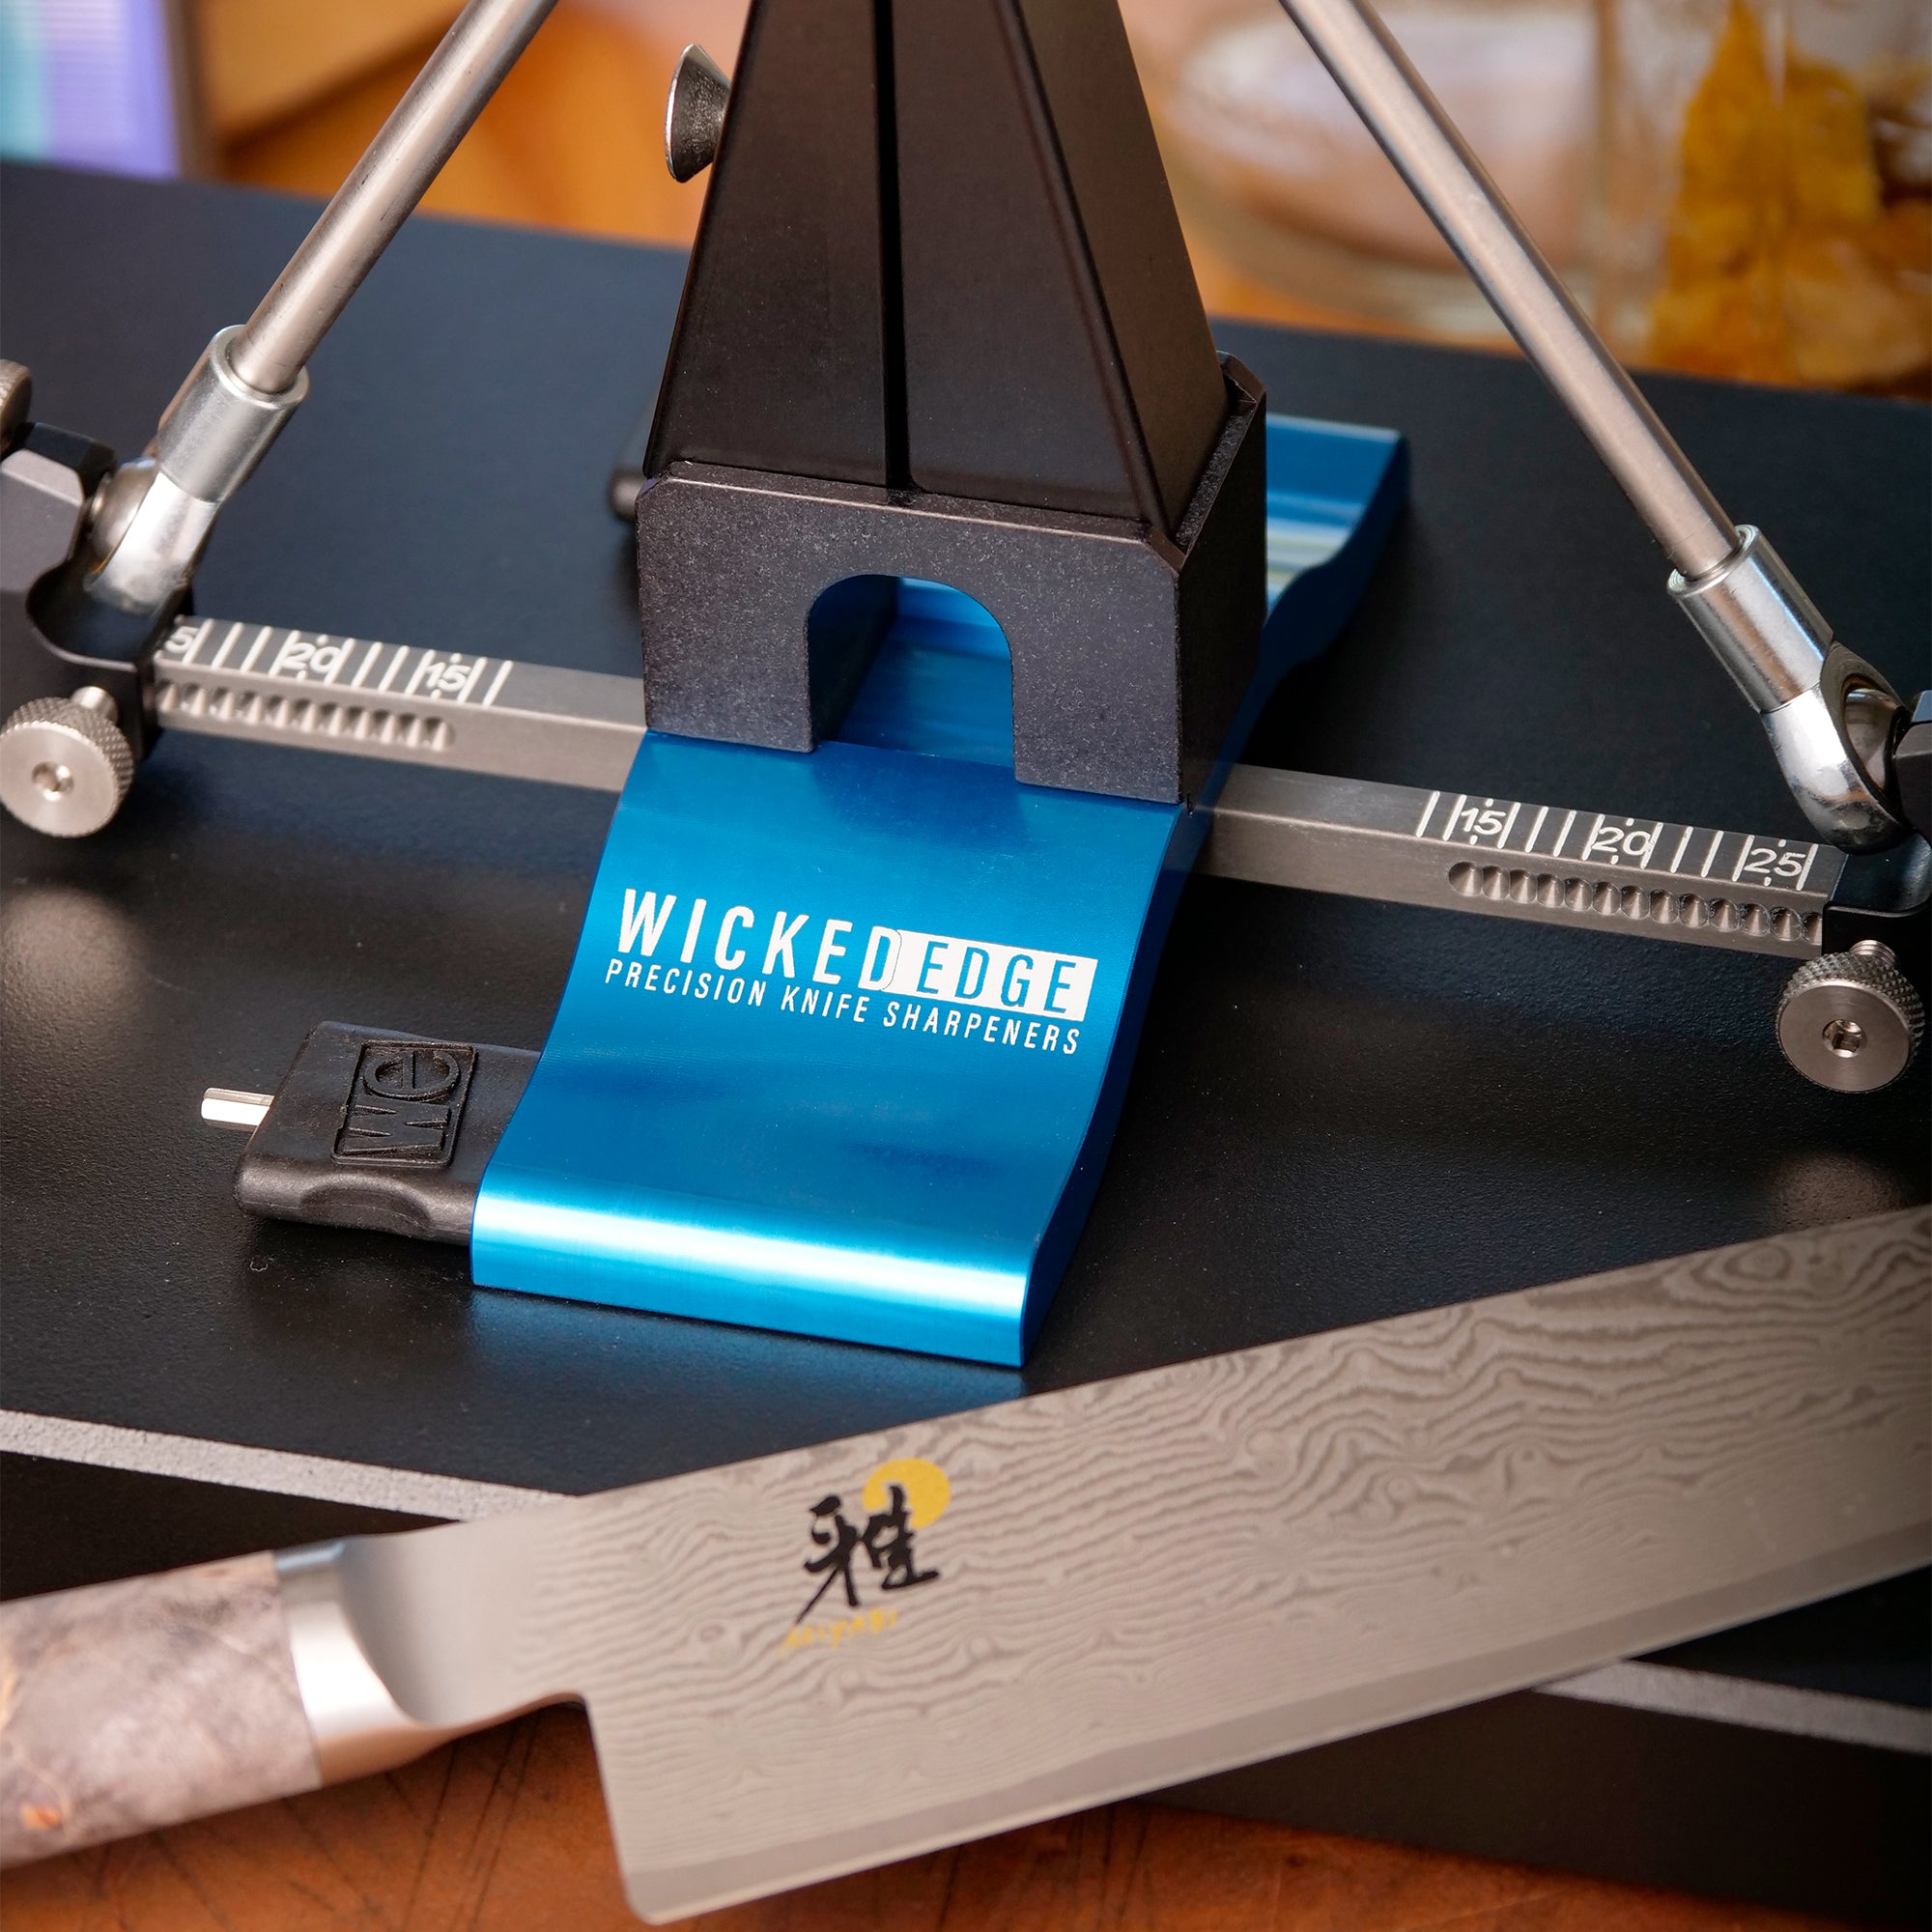 Knife Sharpening Made EASY! // Wicked Edge Gen 3 Pro Review 